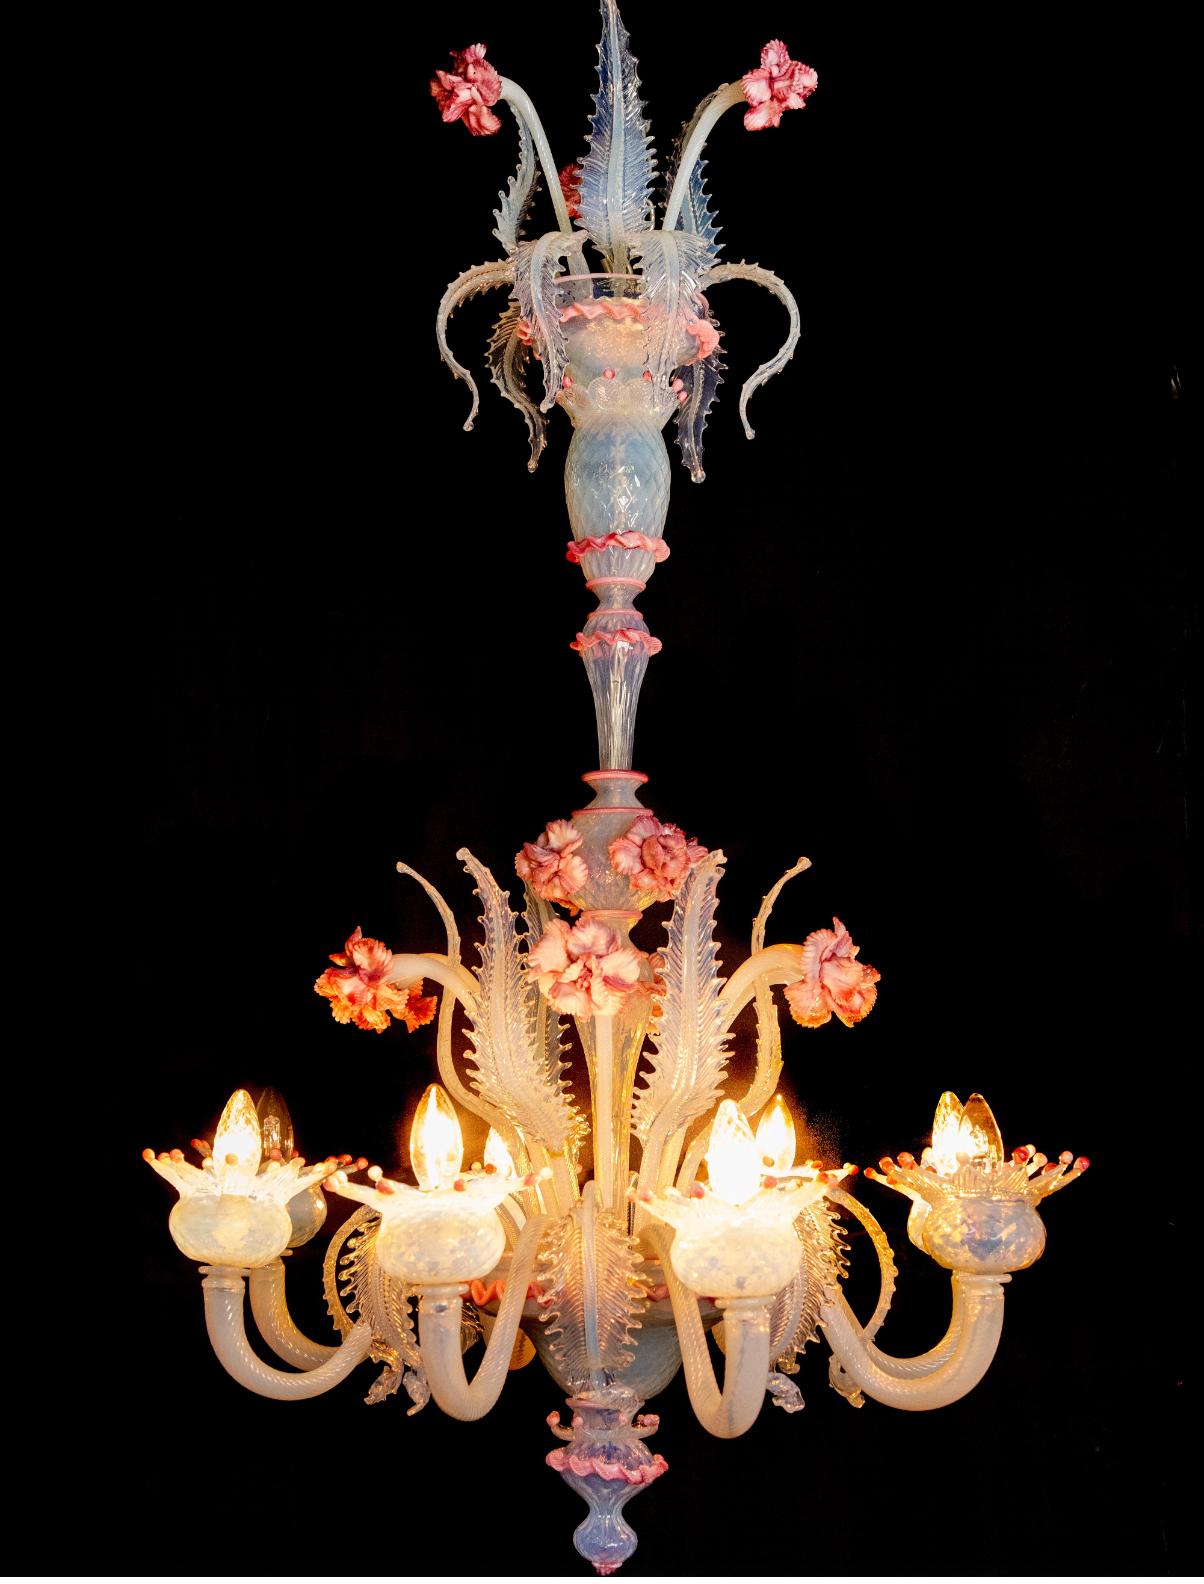 Stunning Trio Light Blue and Pink Venetian Chandeliers, Murano, 1950s For Sale 6